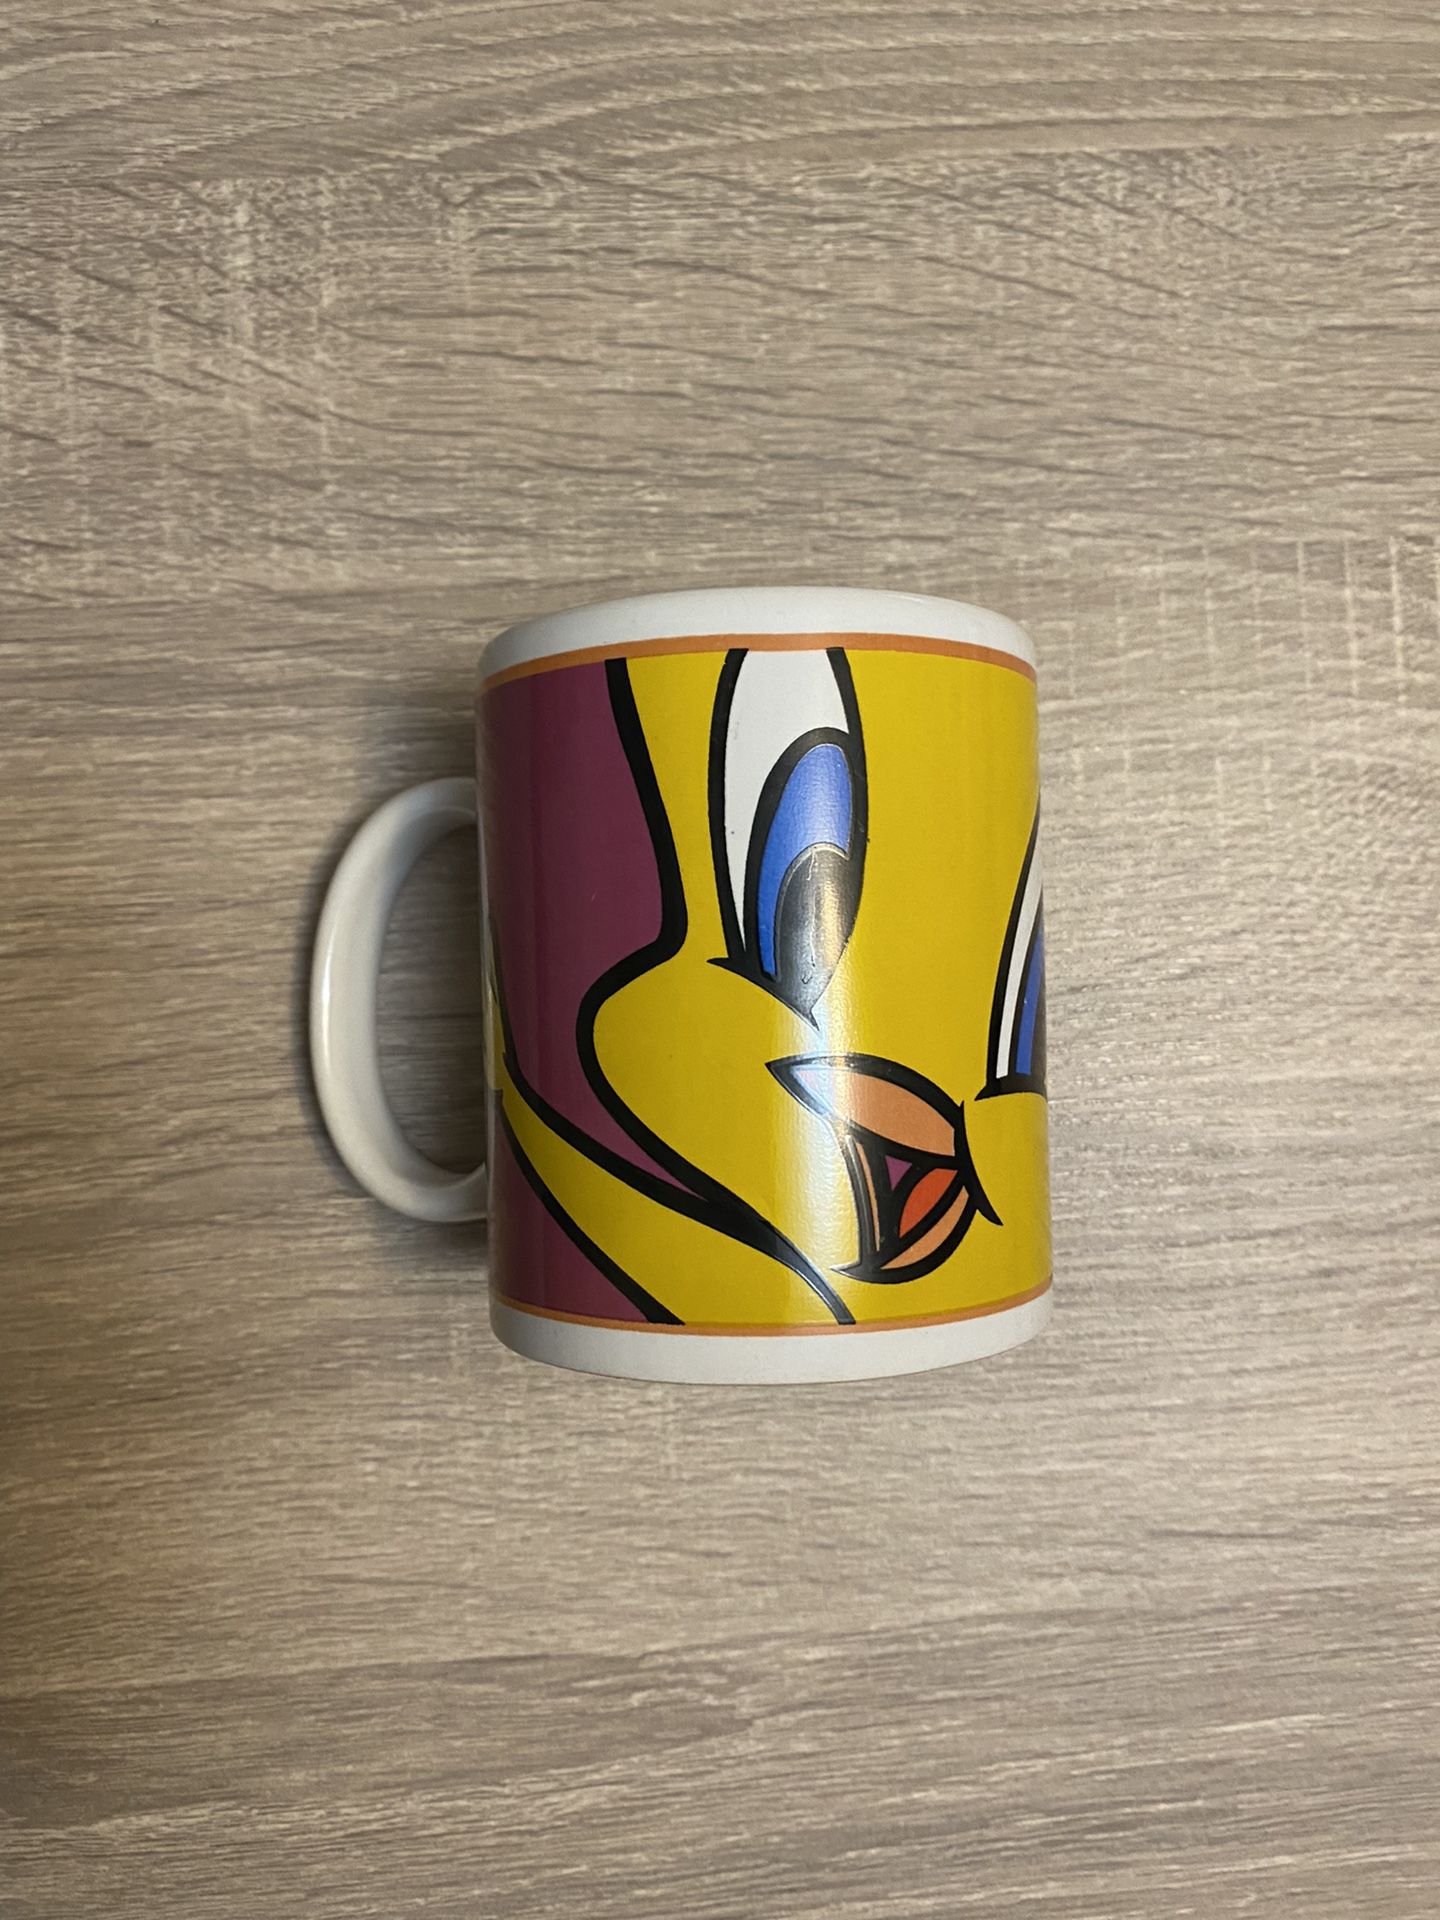 Looney Tunes Marketed By Gibson Tweety Bird Mug Cup Vintage 2000s